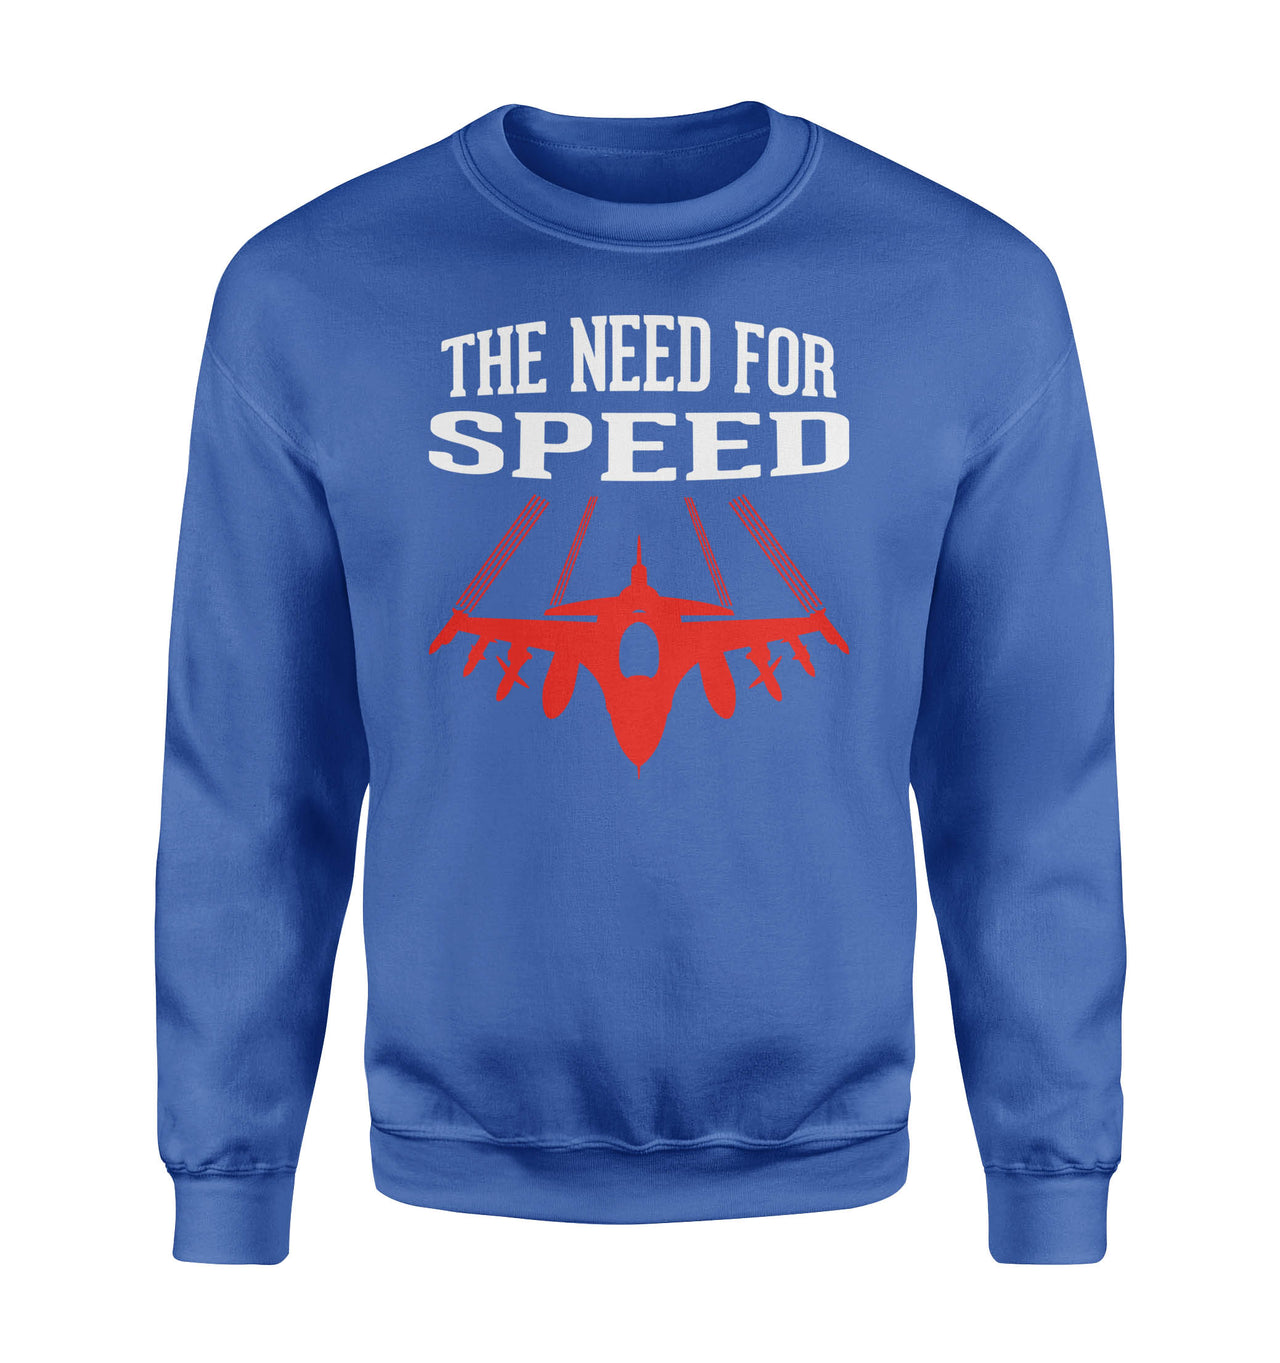 The Need For Speed Designed Sweatshirts